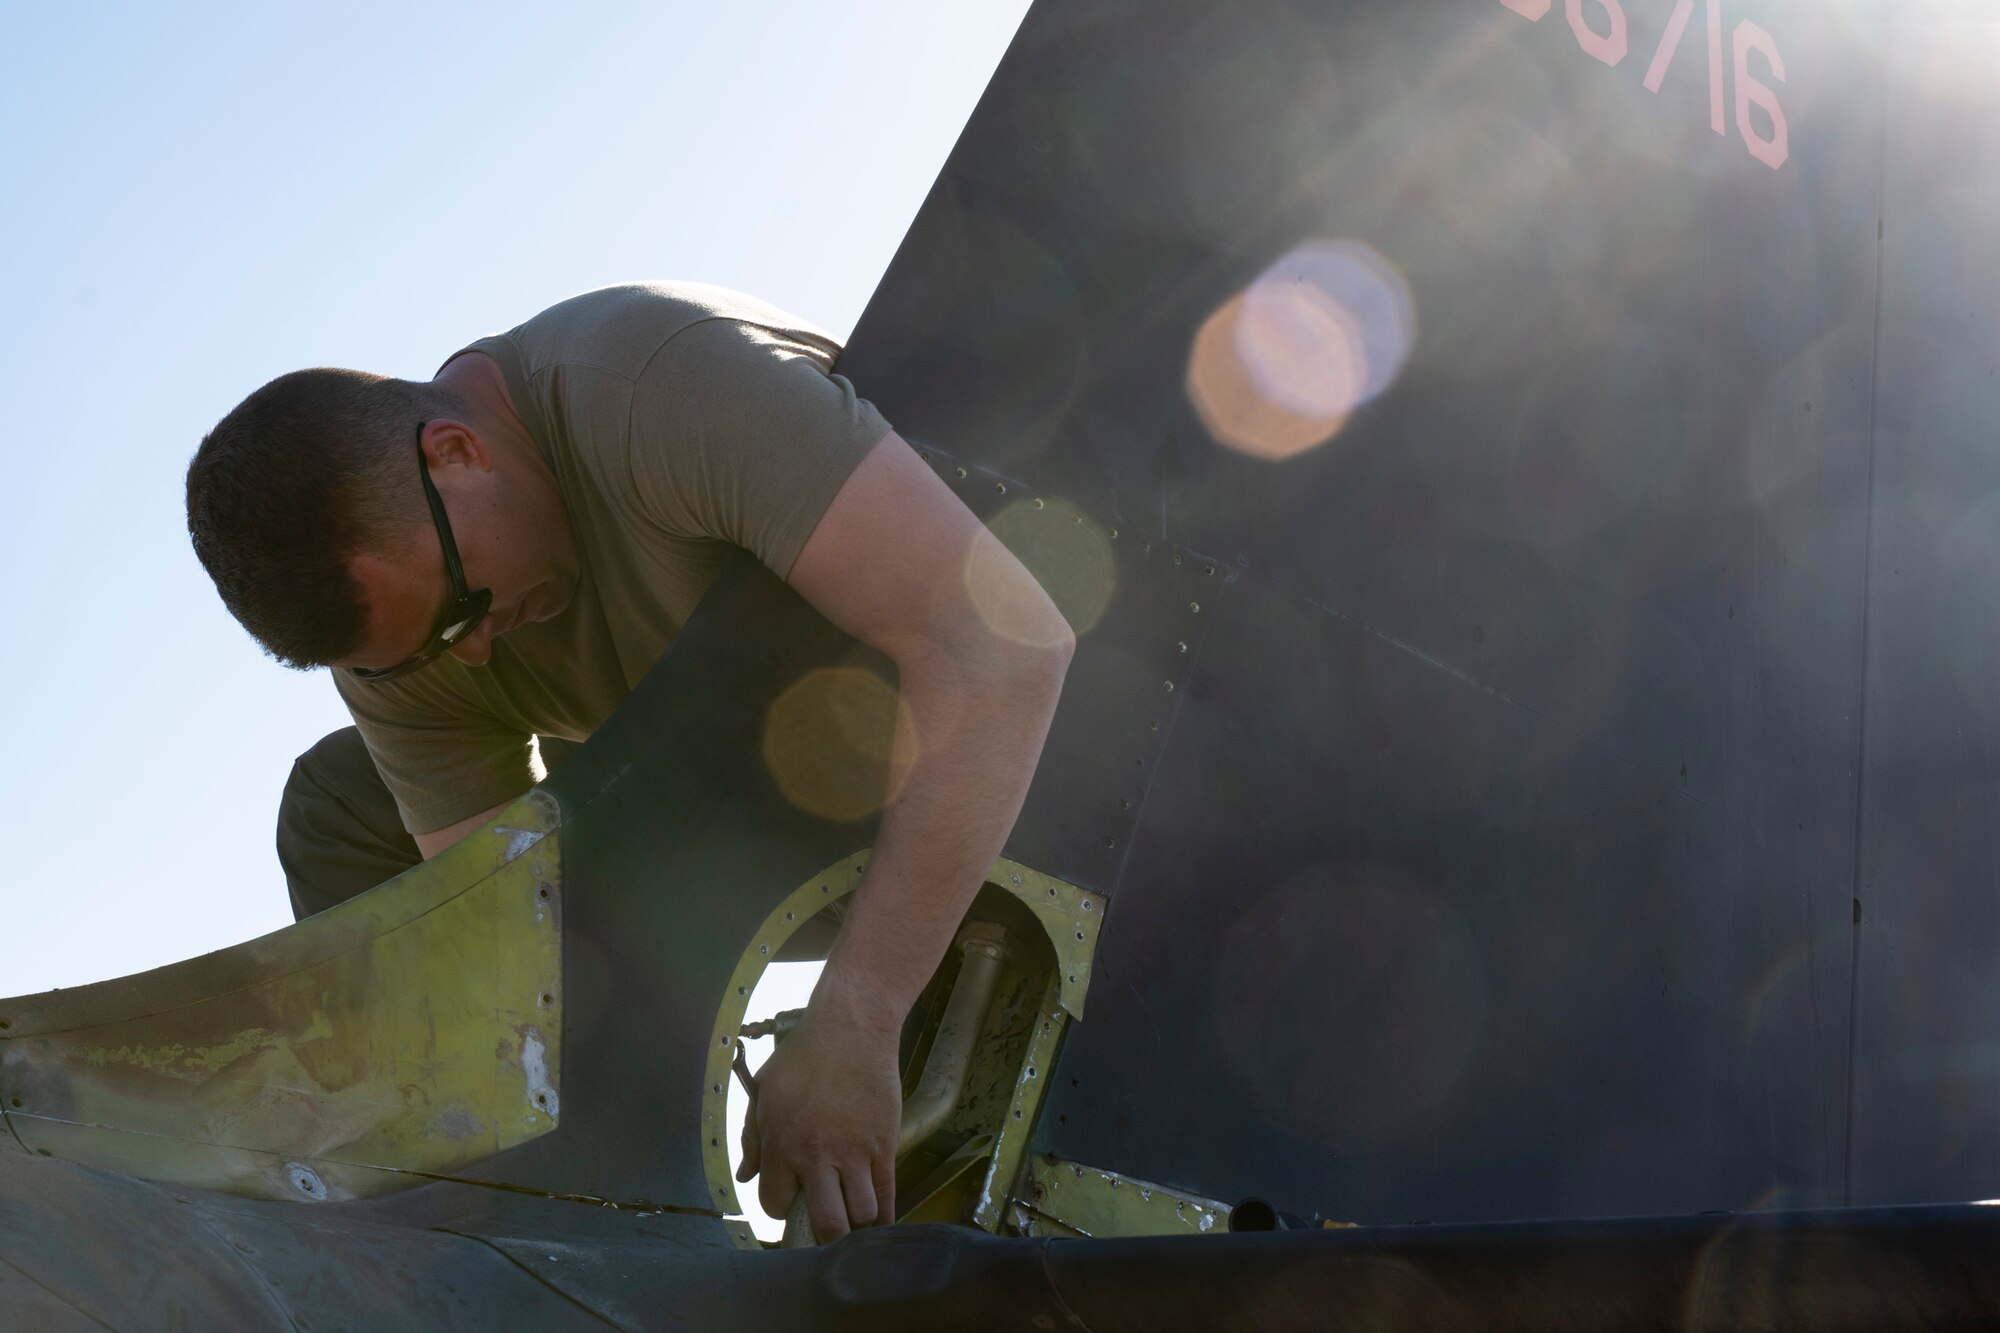 An Airmen is leaning over the tail of an aircraft, working to detach it from the body of the aircraft.